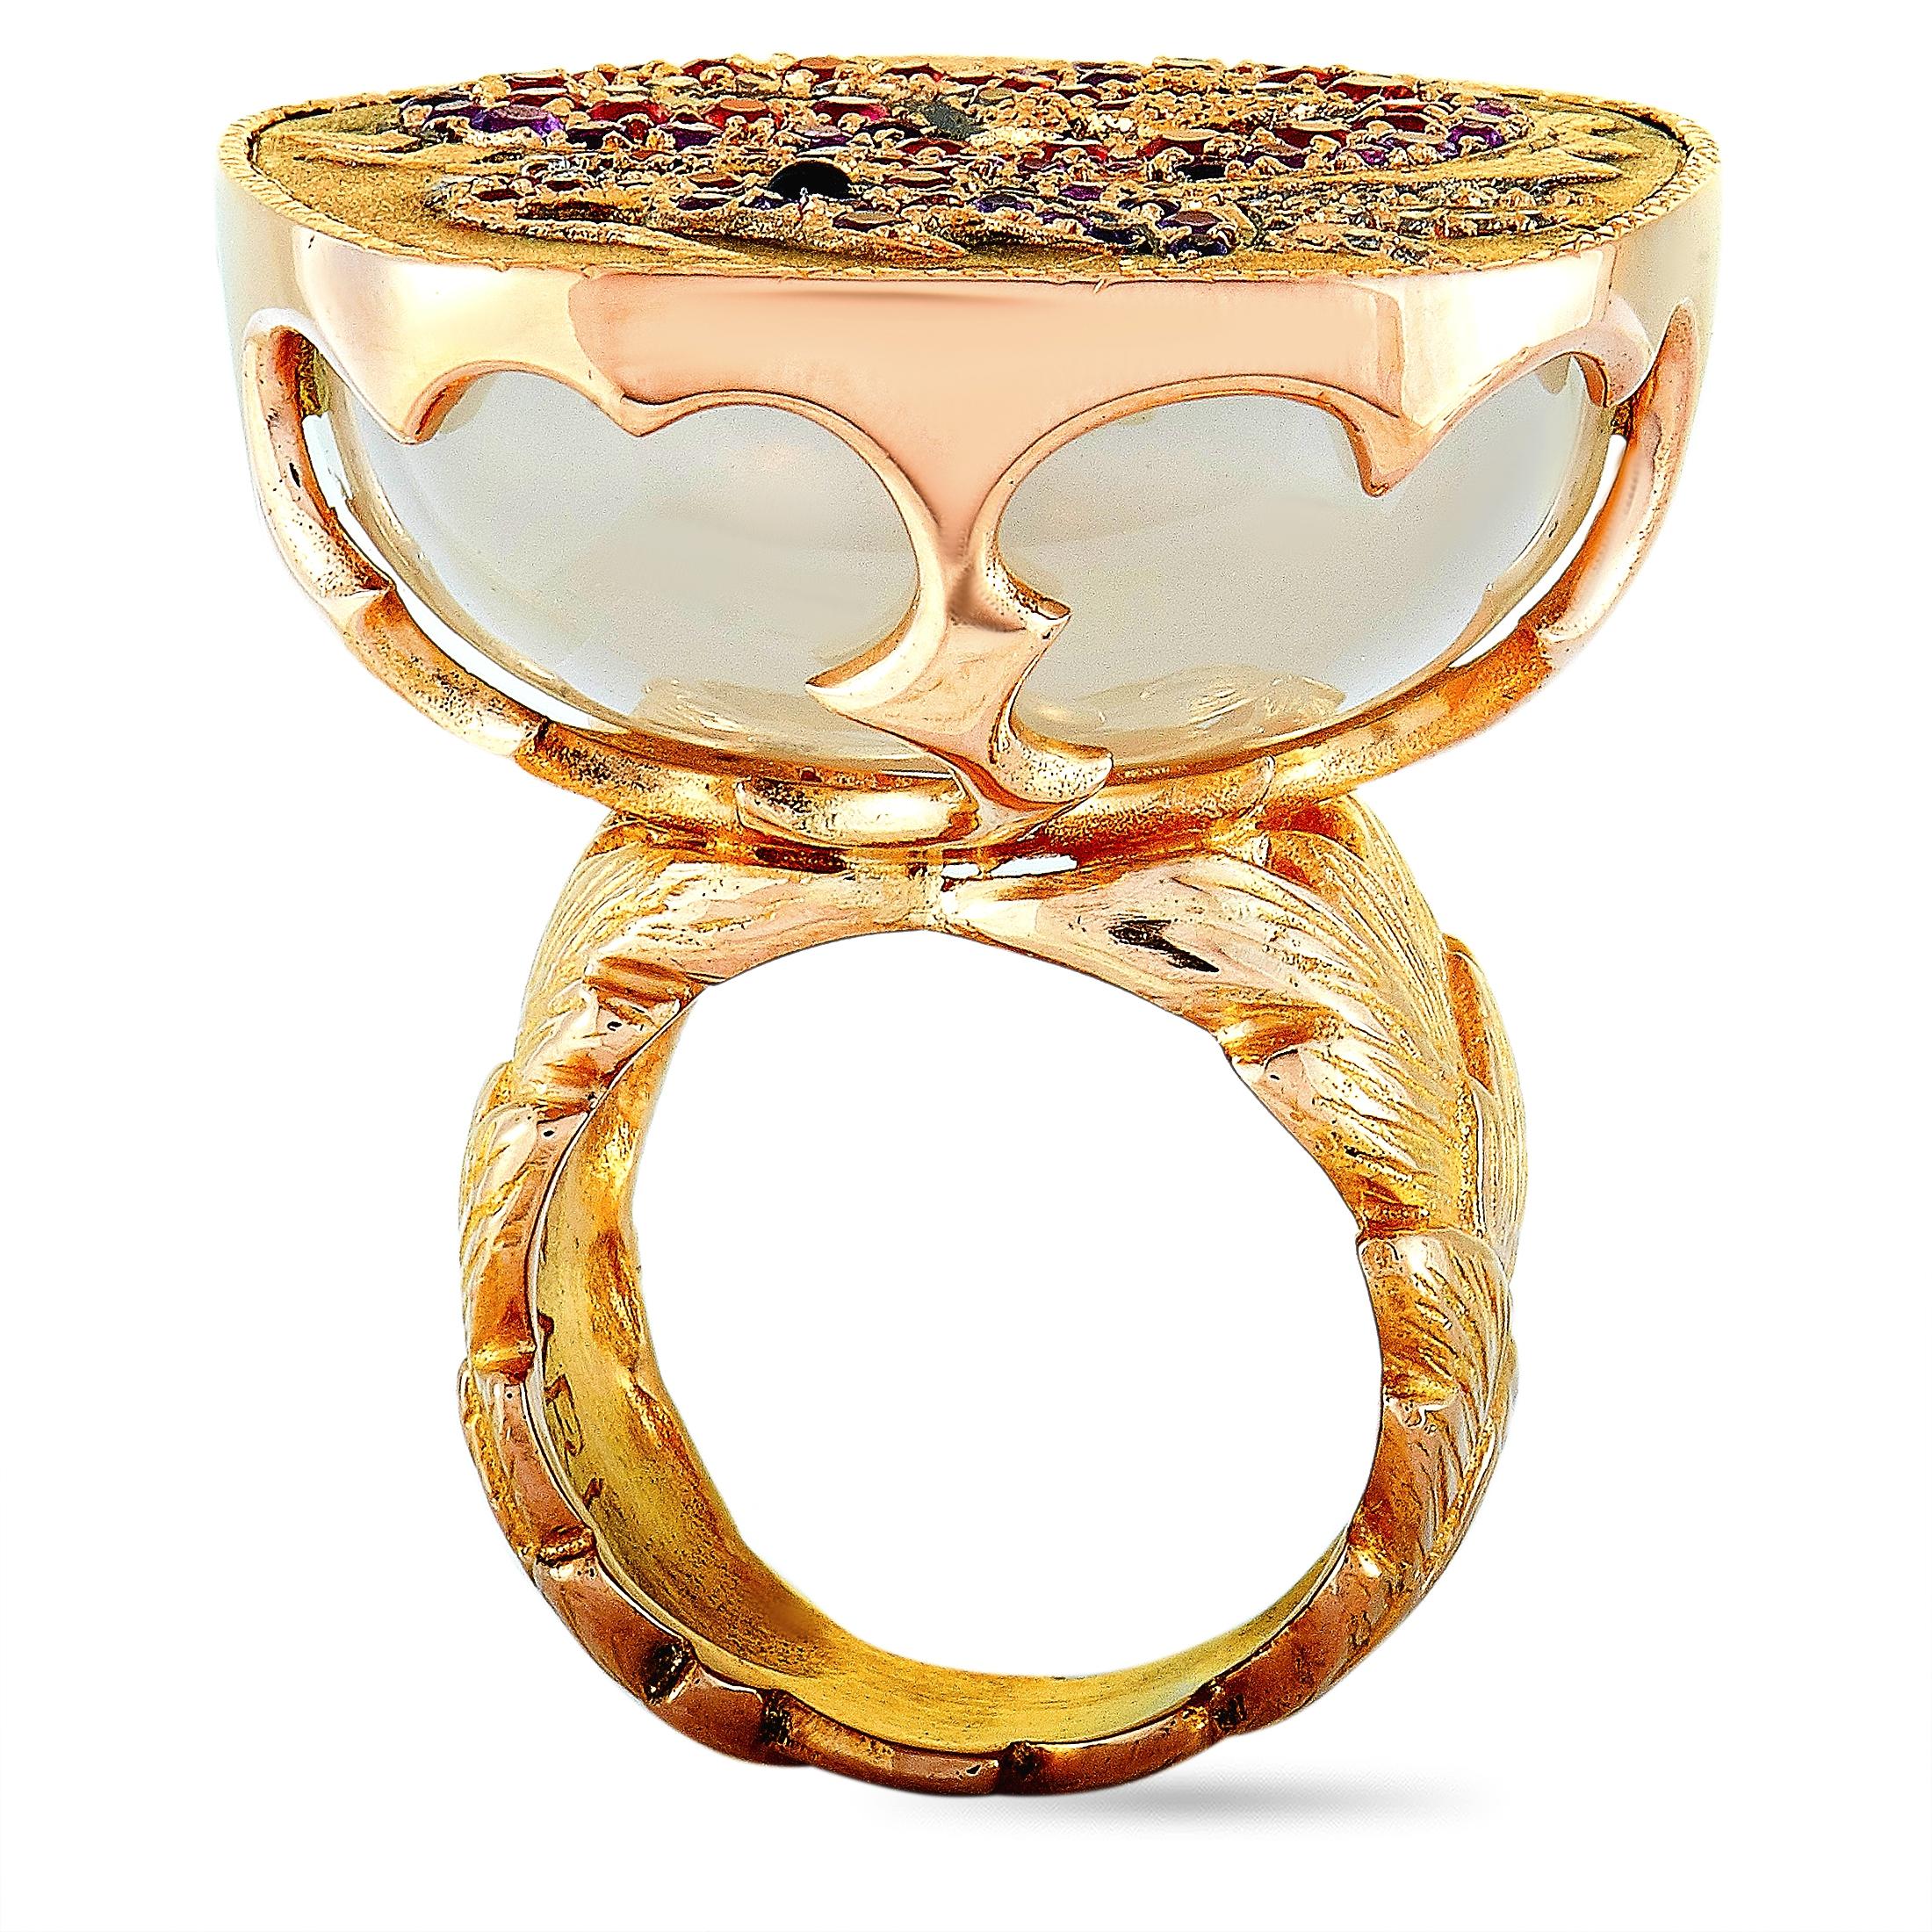 This Vasari ring is made of 18K rose gold and set with diamonds, orange and purple sapphires, and quartz. The ring weighs 37.2 grams and boasts band thickness of 7 mm and top height of 14 mm, while top dimensions measure 30 by 31 mm.
 
 Offered in